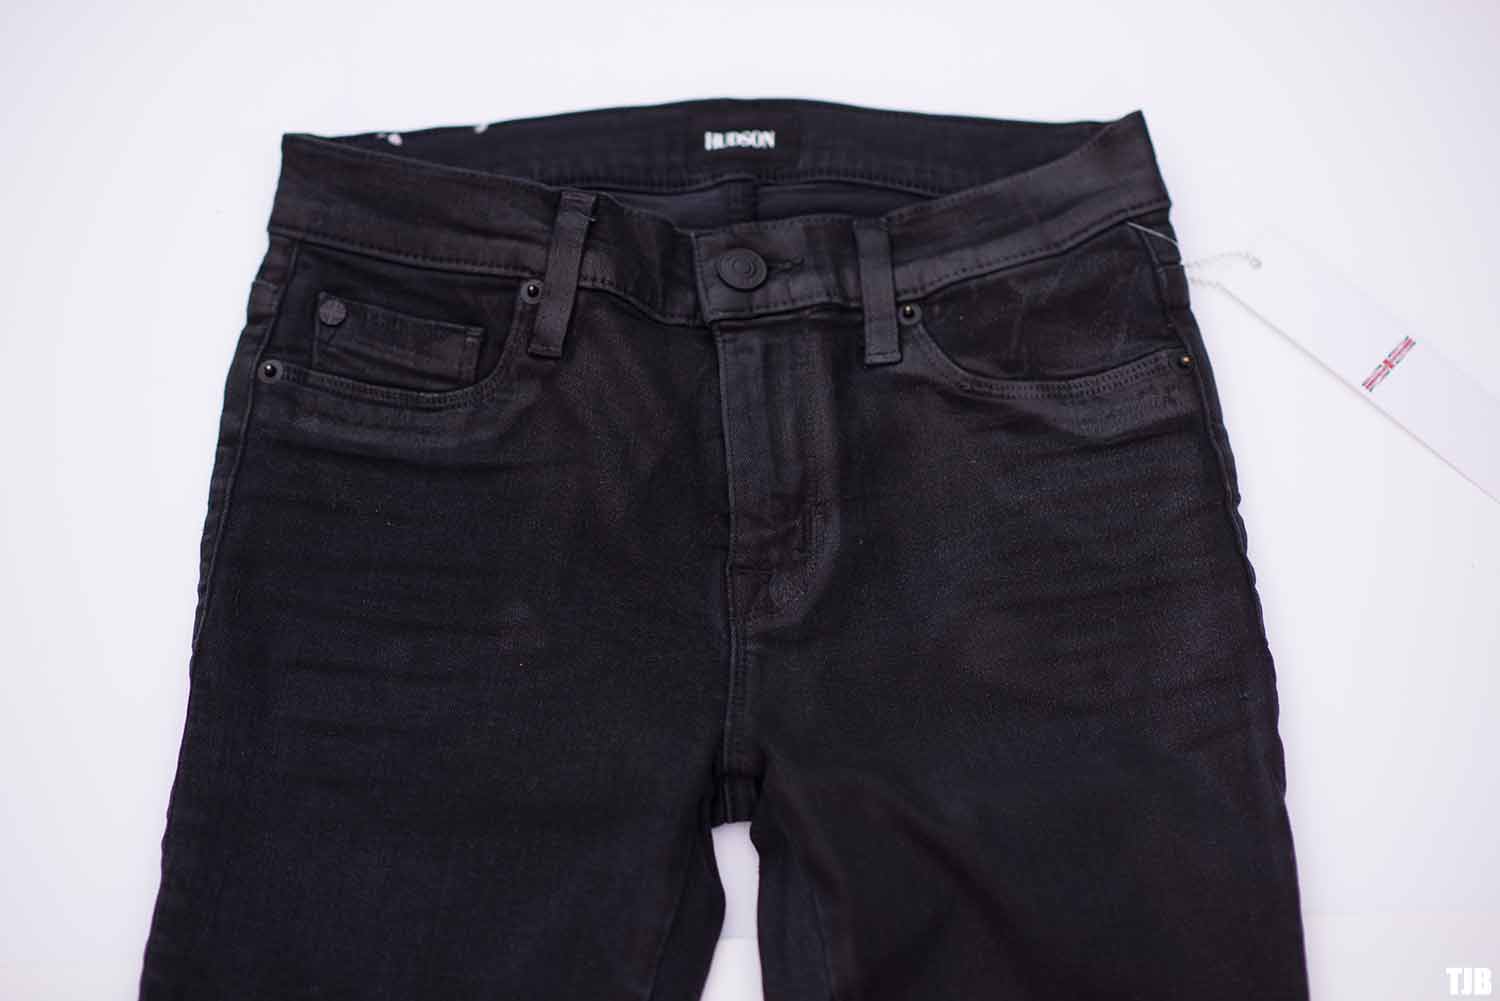 hudson-nix-skinny-lace-up-jeans-review-10